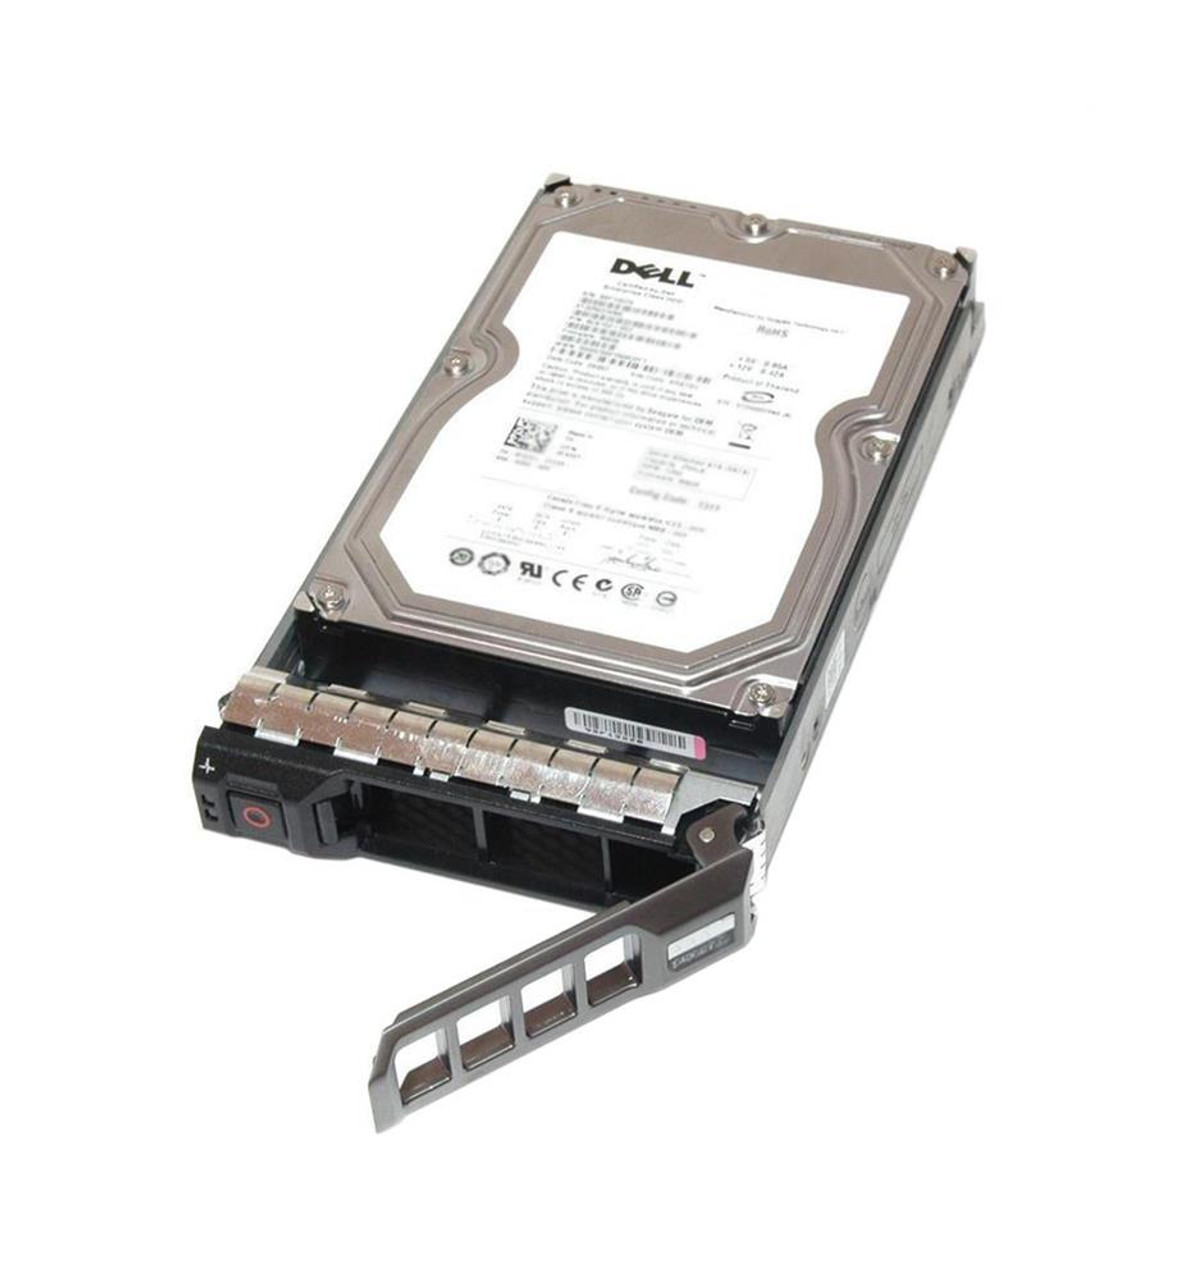 400-AVUS Dell 4TB 7200RPM SAS 12Gbps Dual Port (512n) 3.5-inch Internal Hard Drive with Tray